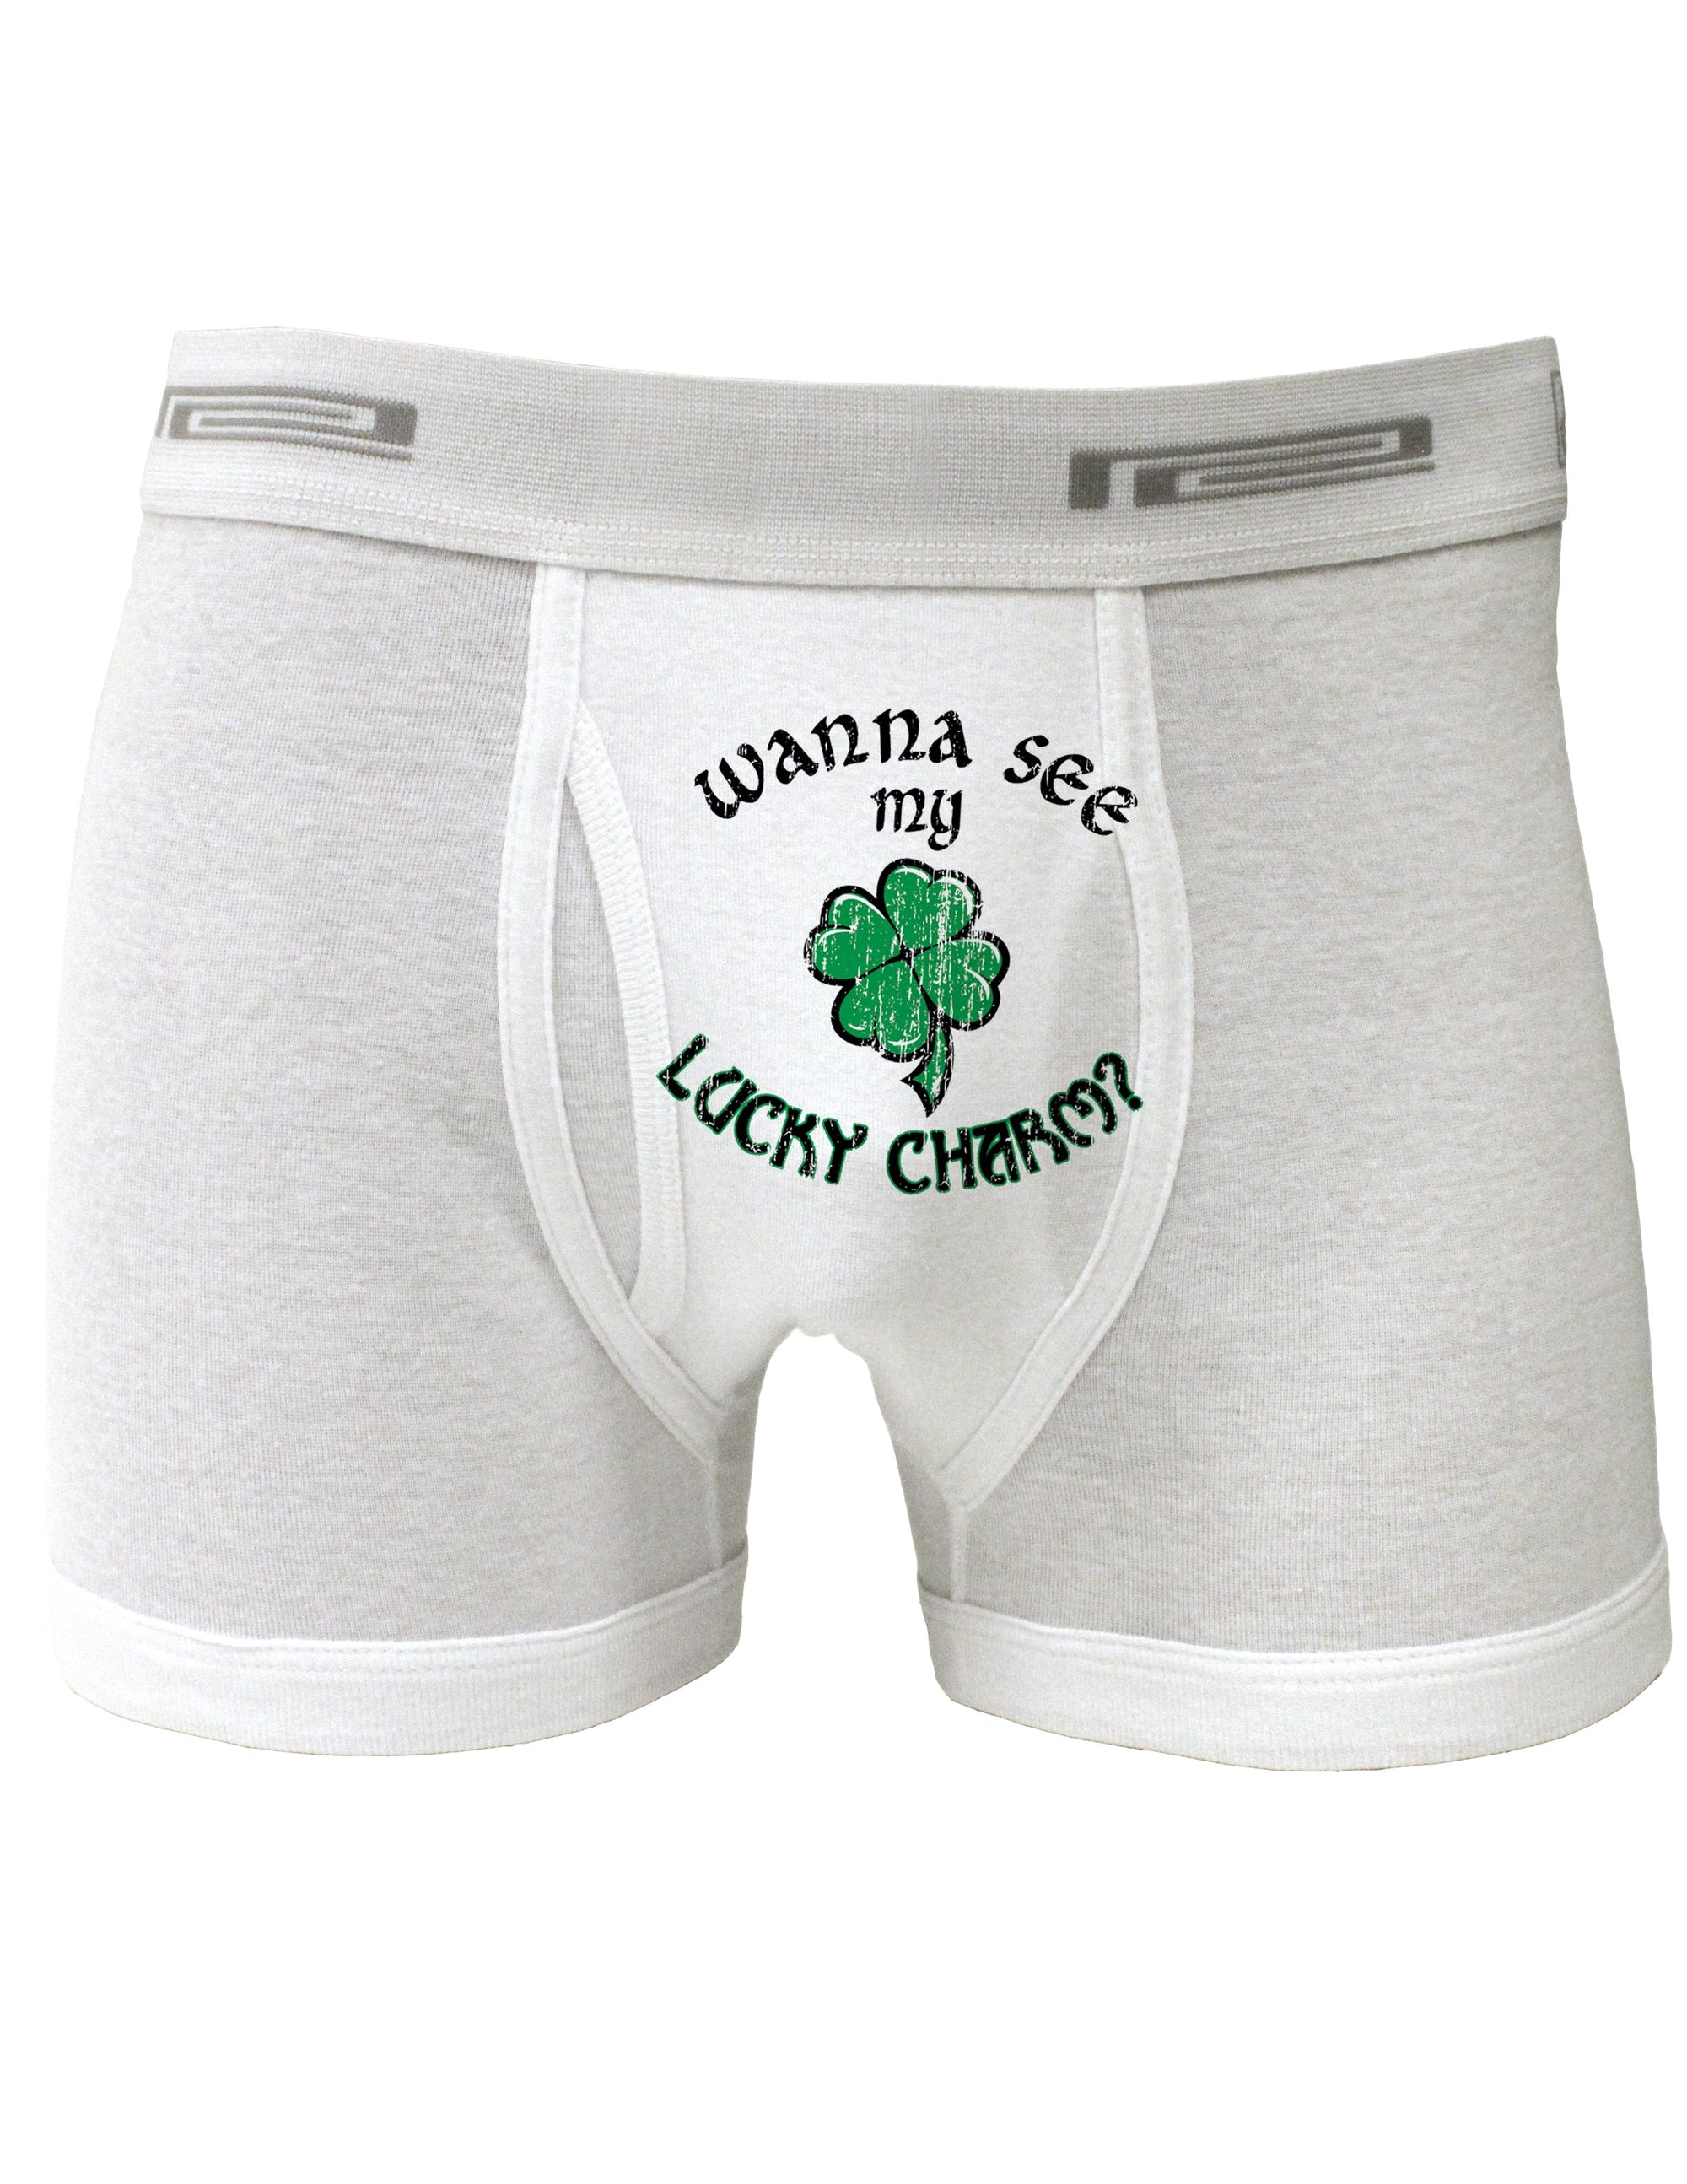 St Patricks Day Boxer Brief Underwear - Select Your Print - ABC